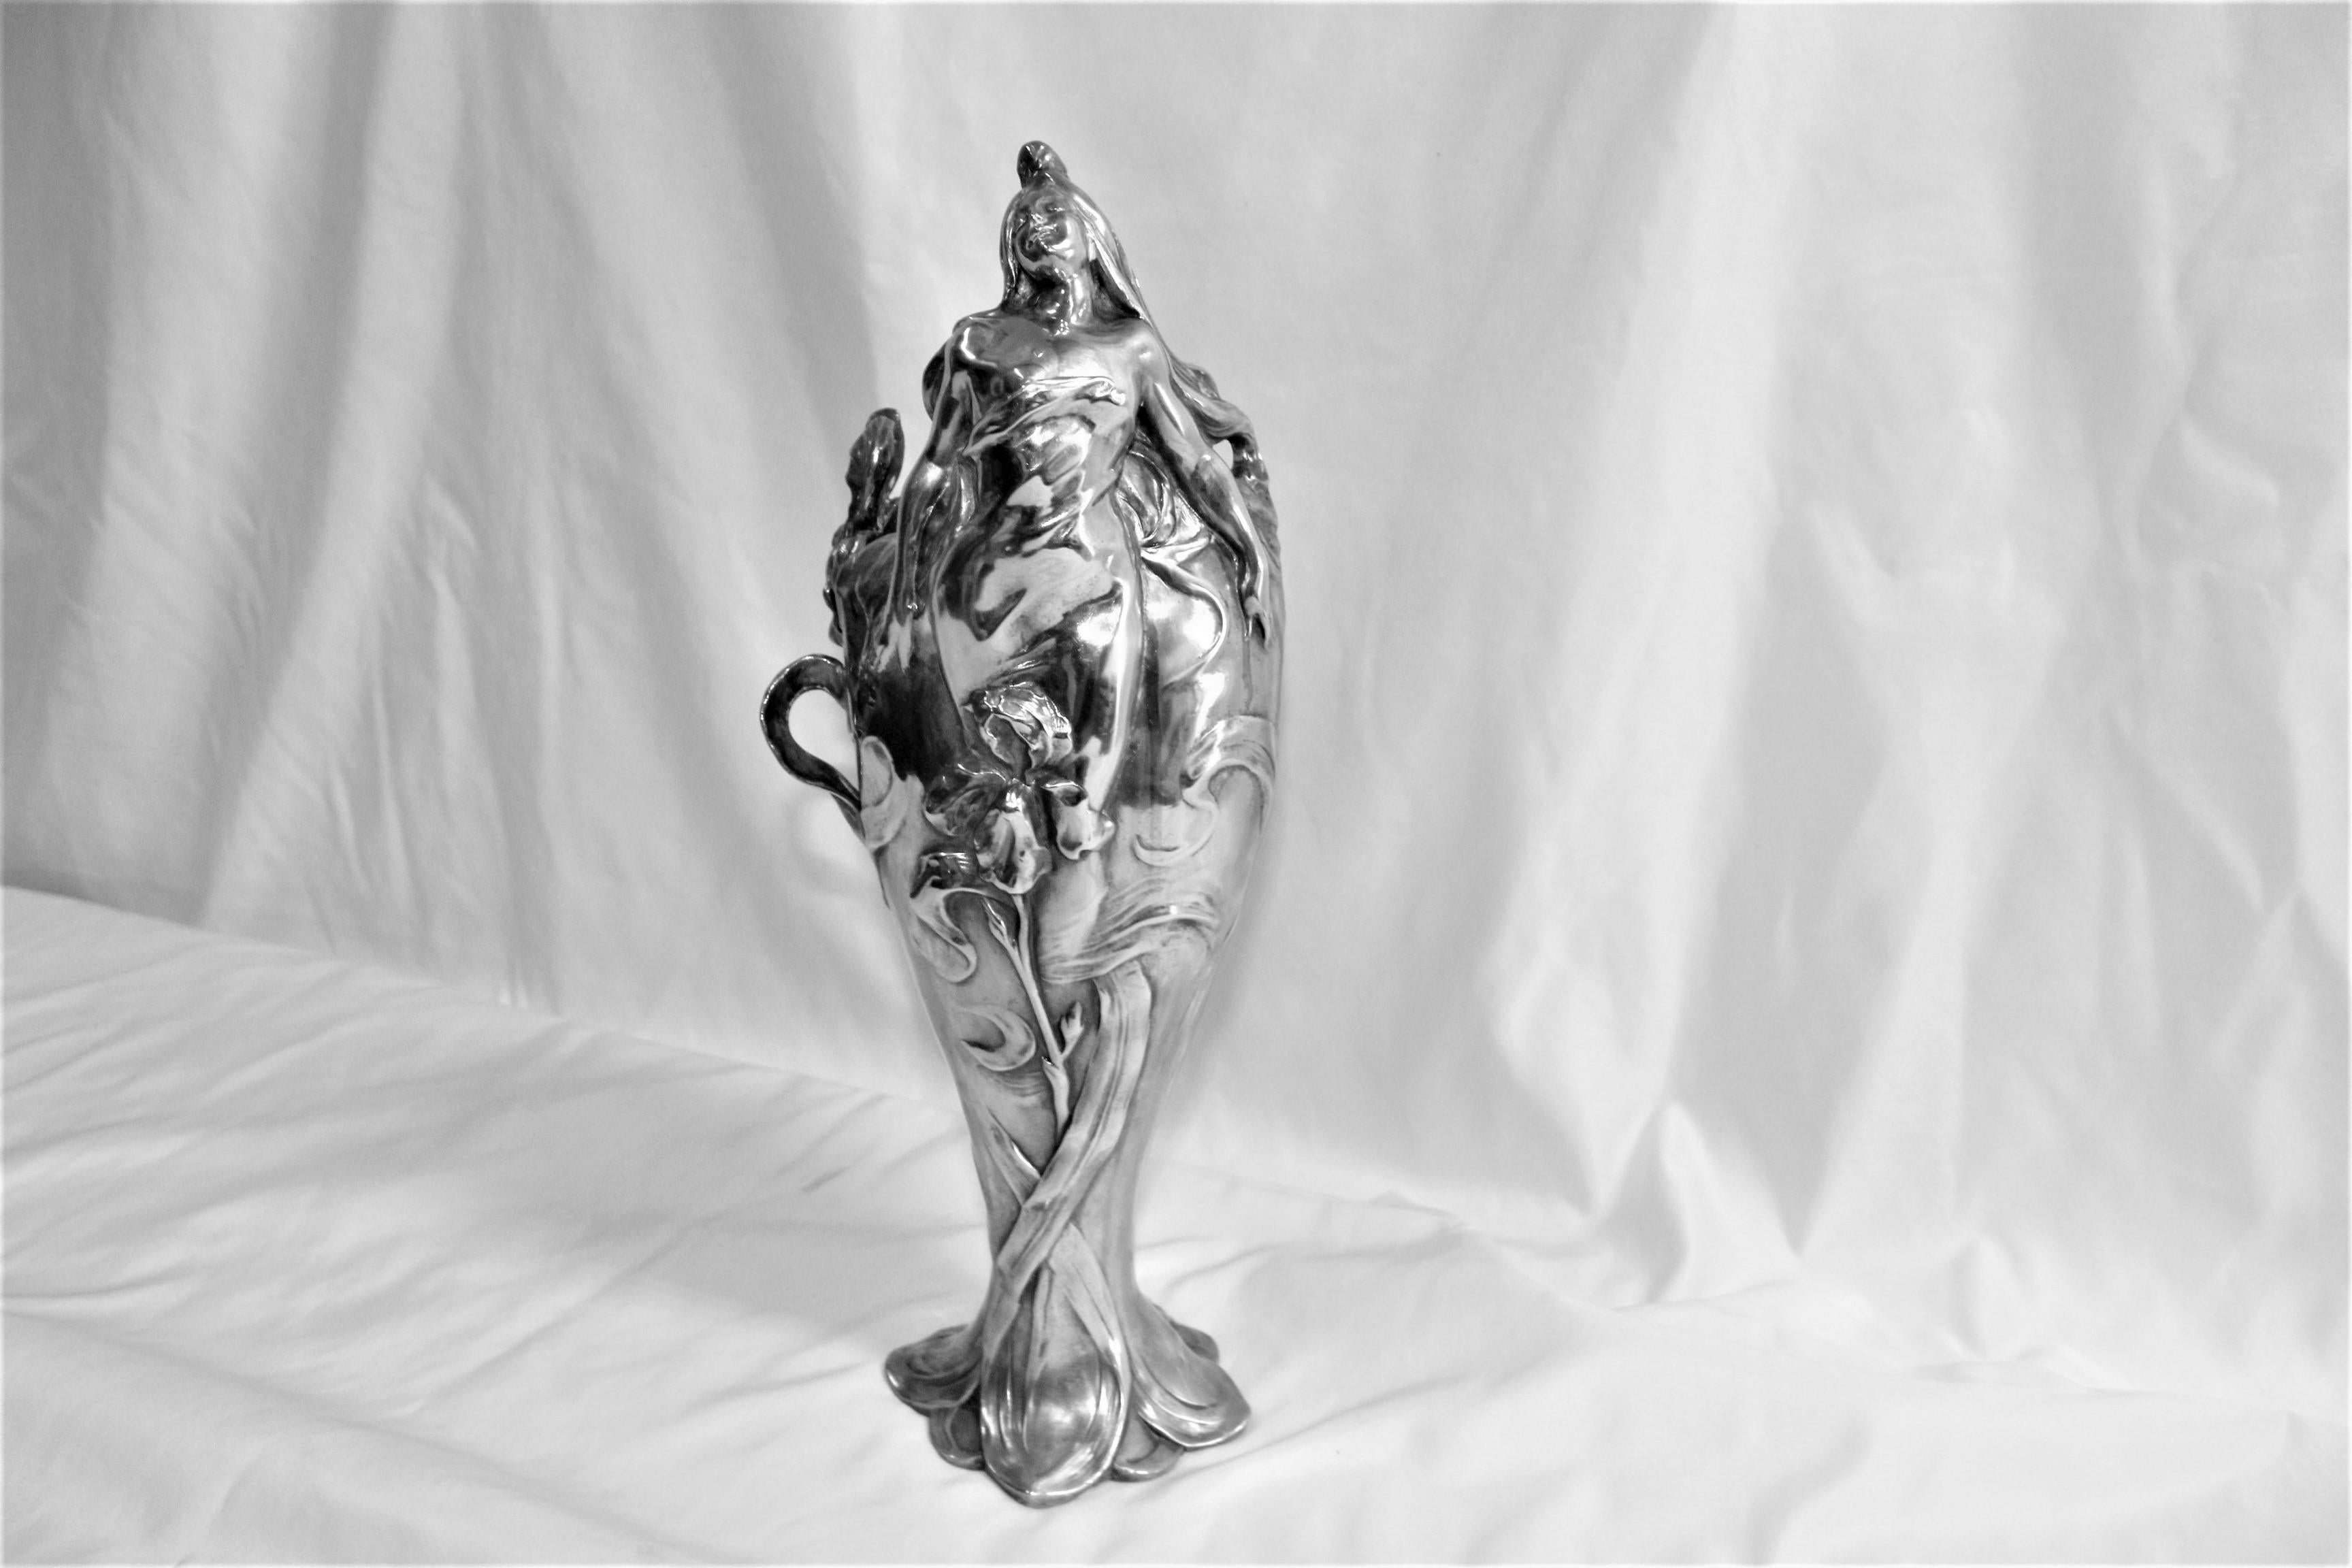 A beautiful young girl on top of the vase with her arms outstretched above an Orchid on the side. All hand finished and hi-polished in Nickel or Chrome. Signature is hard to read (Bo Nefond ) and foundry stamp on the bottom. From a private